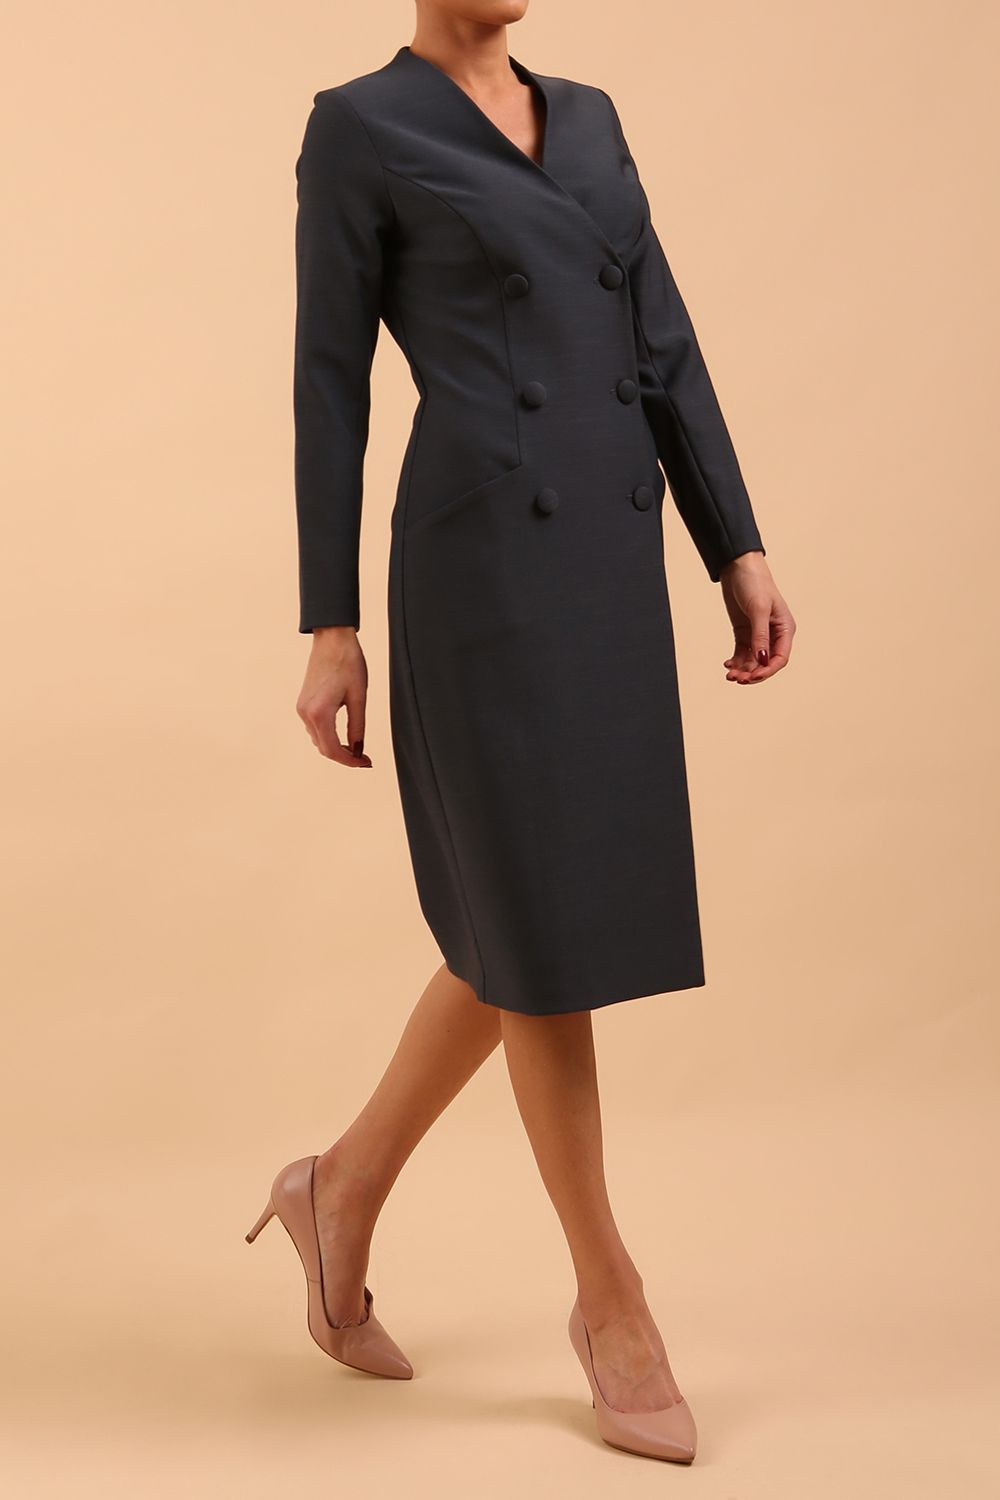 Brunette model wearing a diva catwalk Seed Silverstone Long Sleeve Coat Dress with 6 buttons across the front and pockets in colour Slate Grey front side